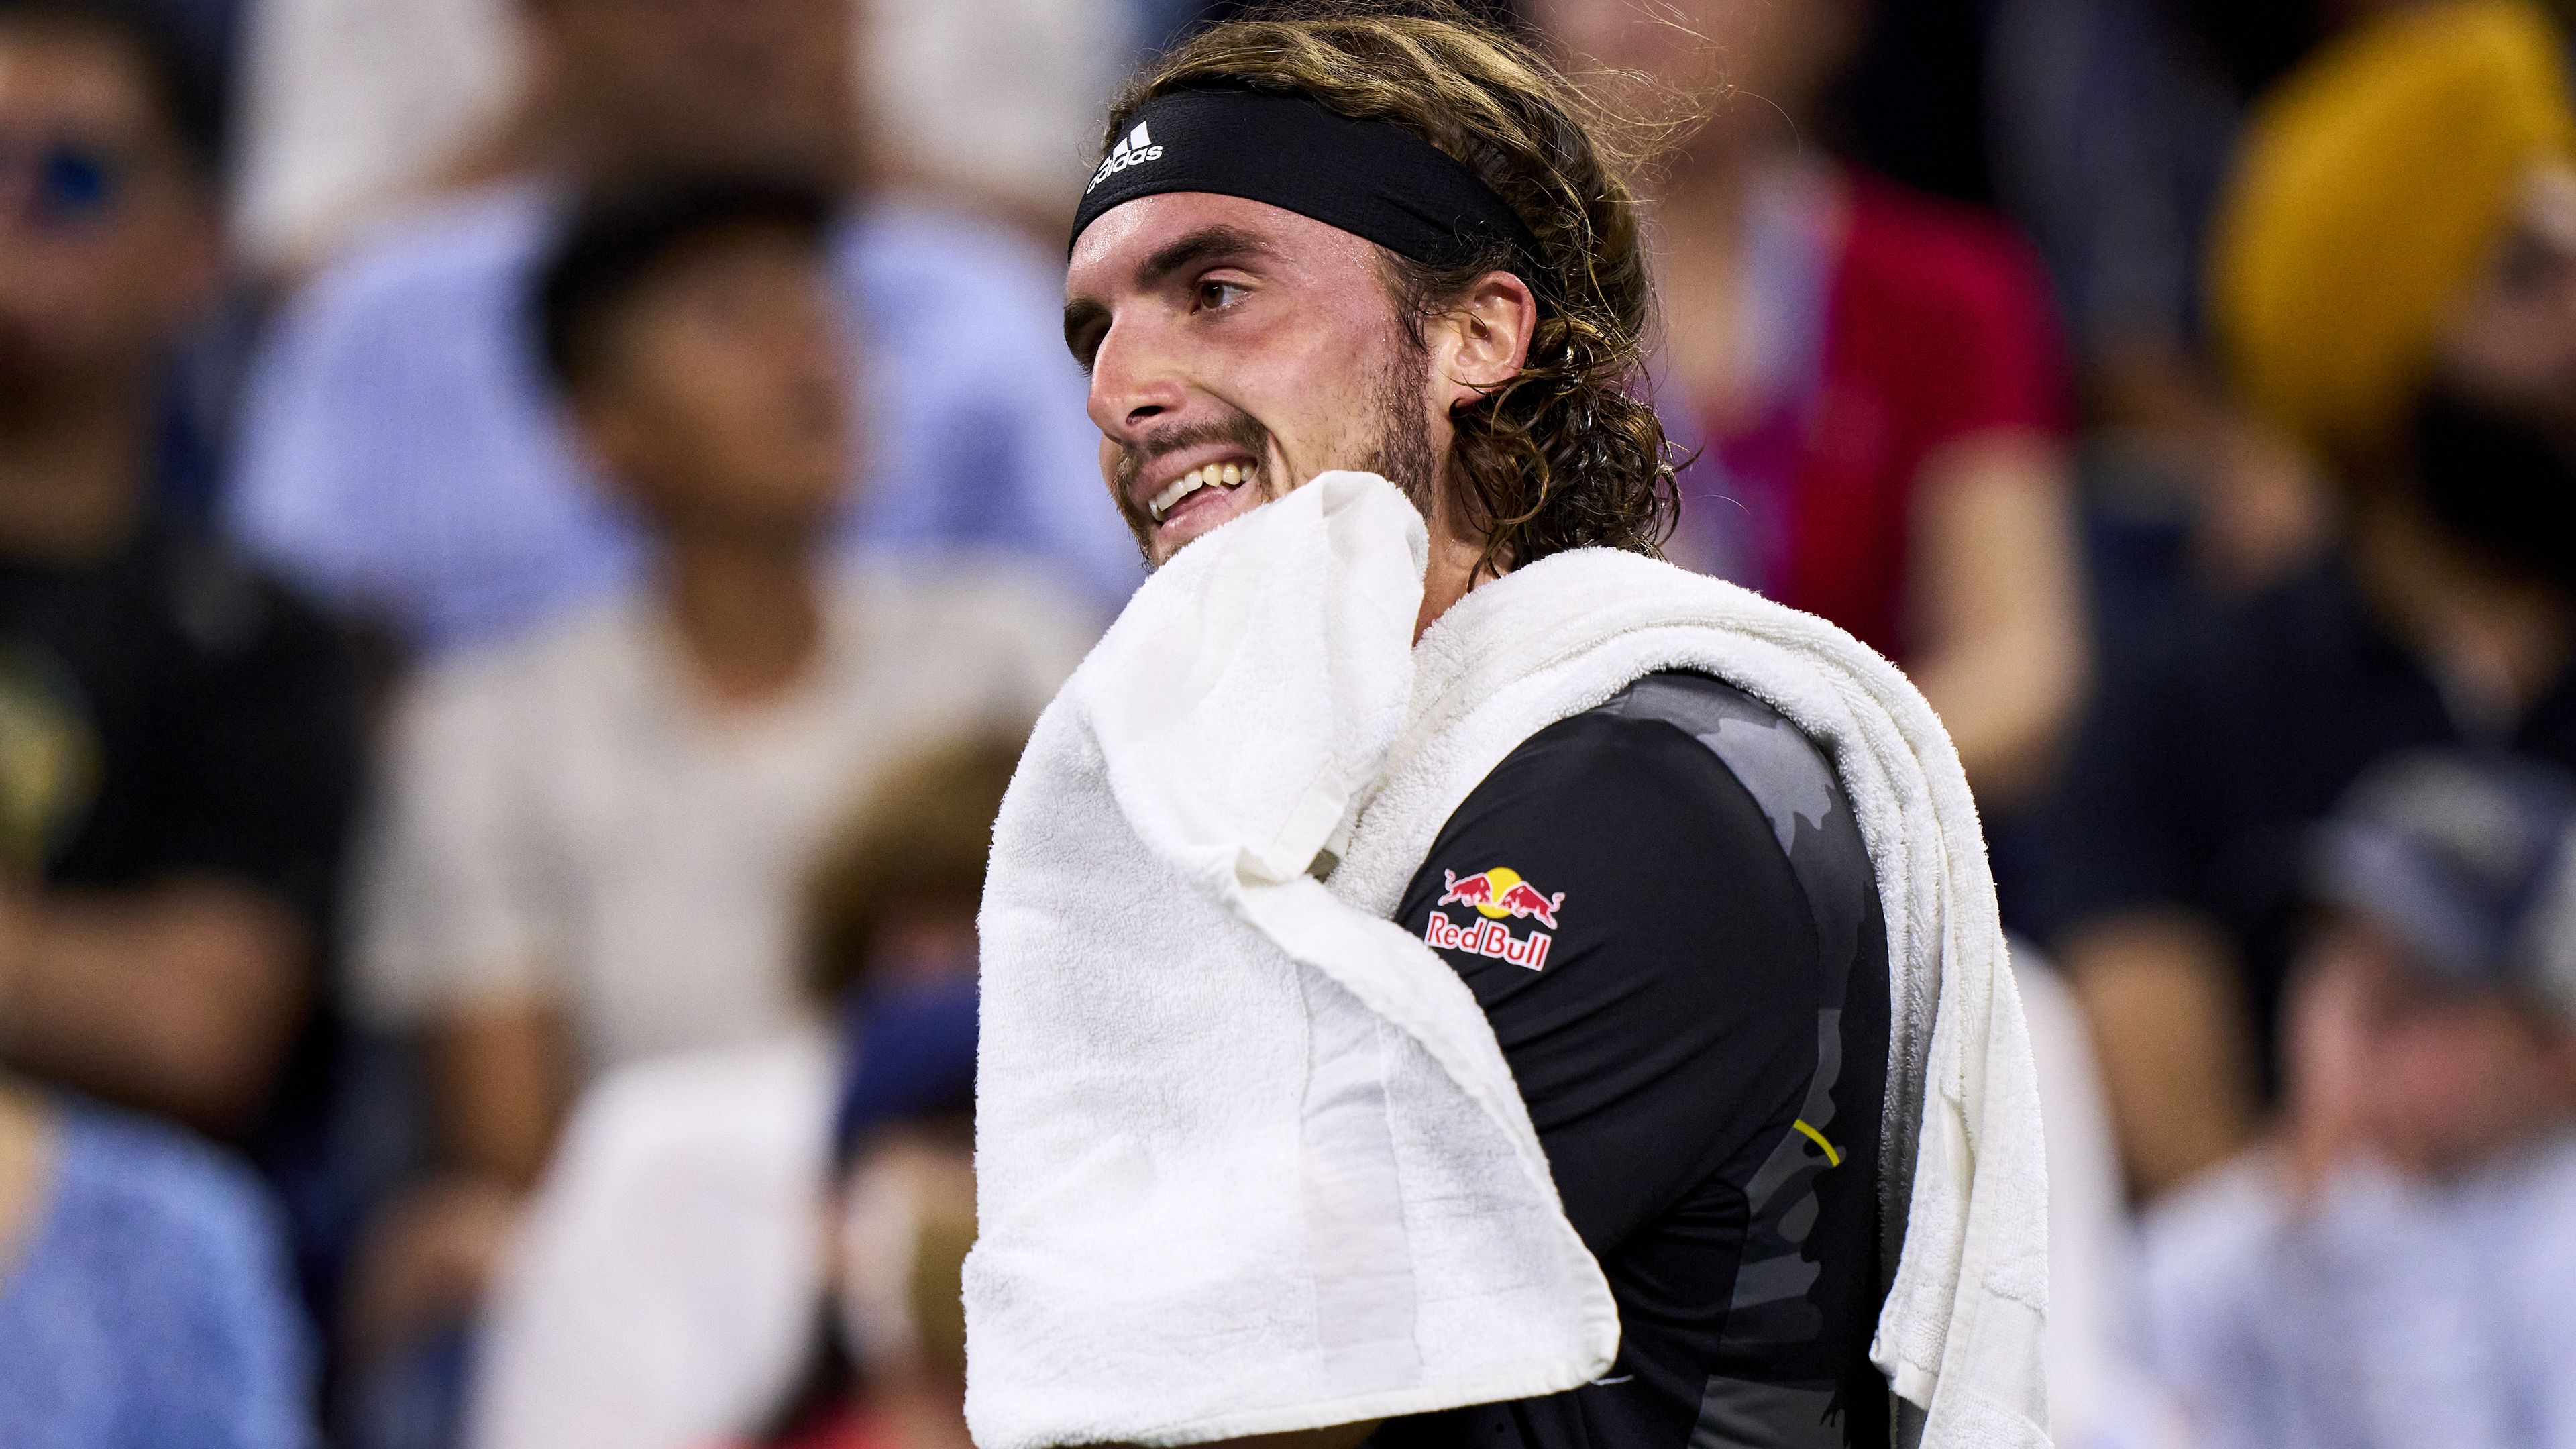 Stefanos Tsitsipas of Greece reacts during his US Open match against Daniel Elahi Galan of Colombia.